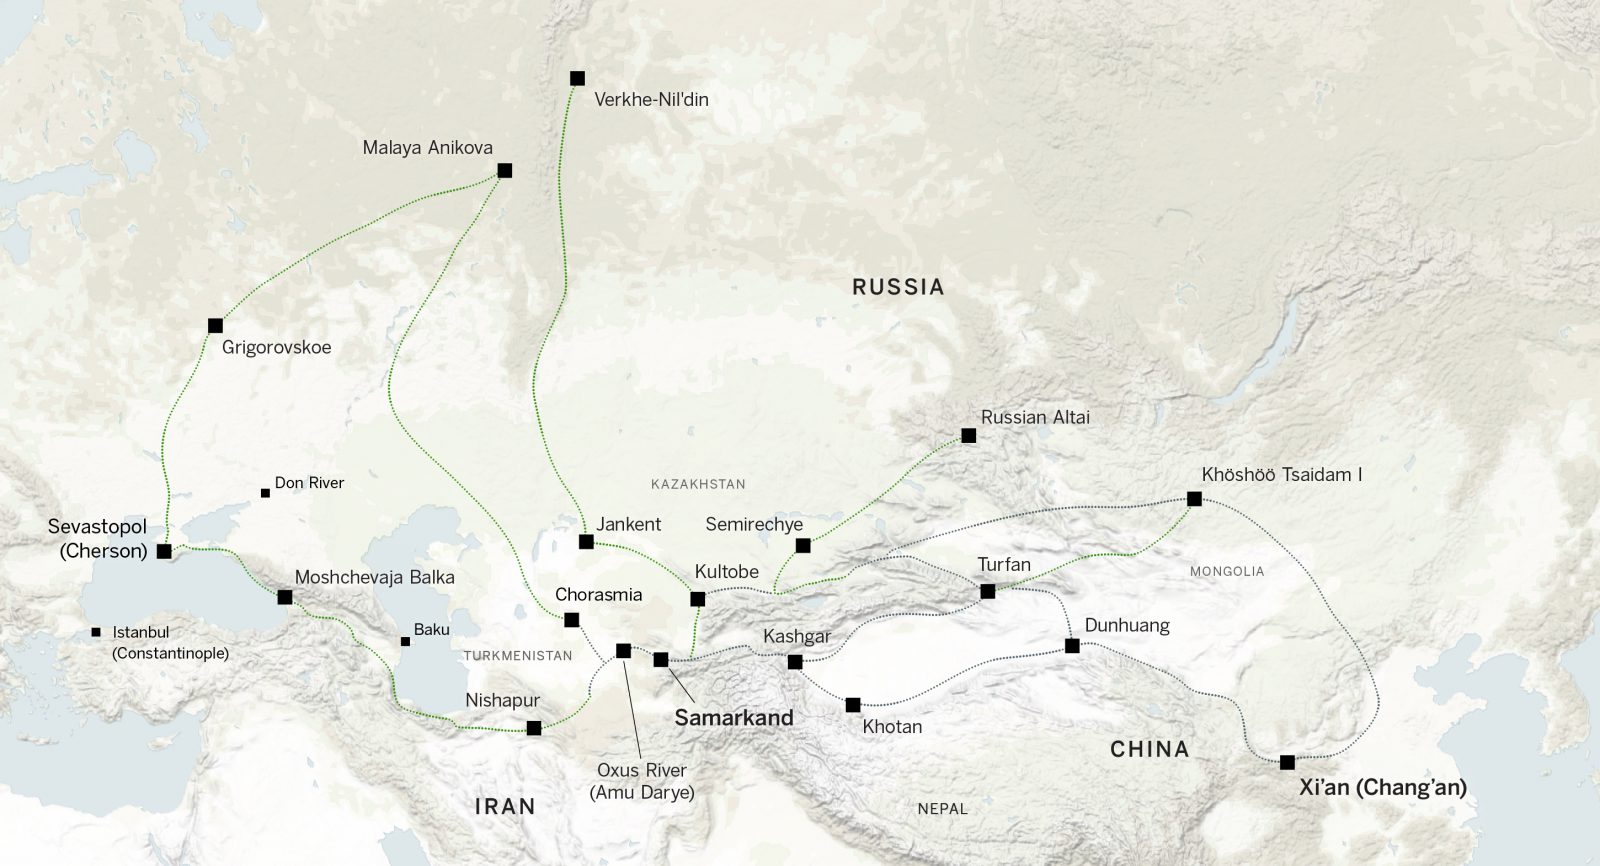 The Silk Road and Fur Routes running east to west and north to south.